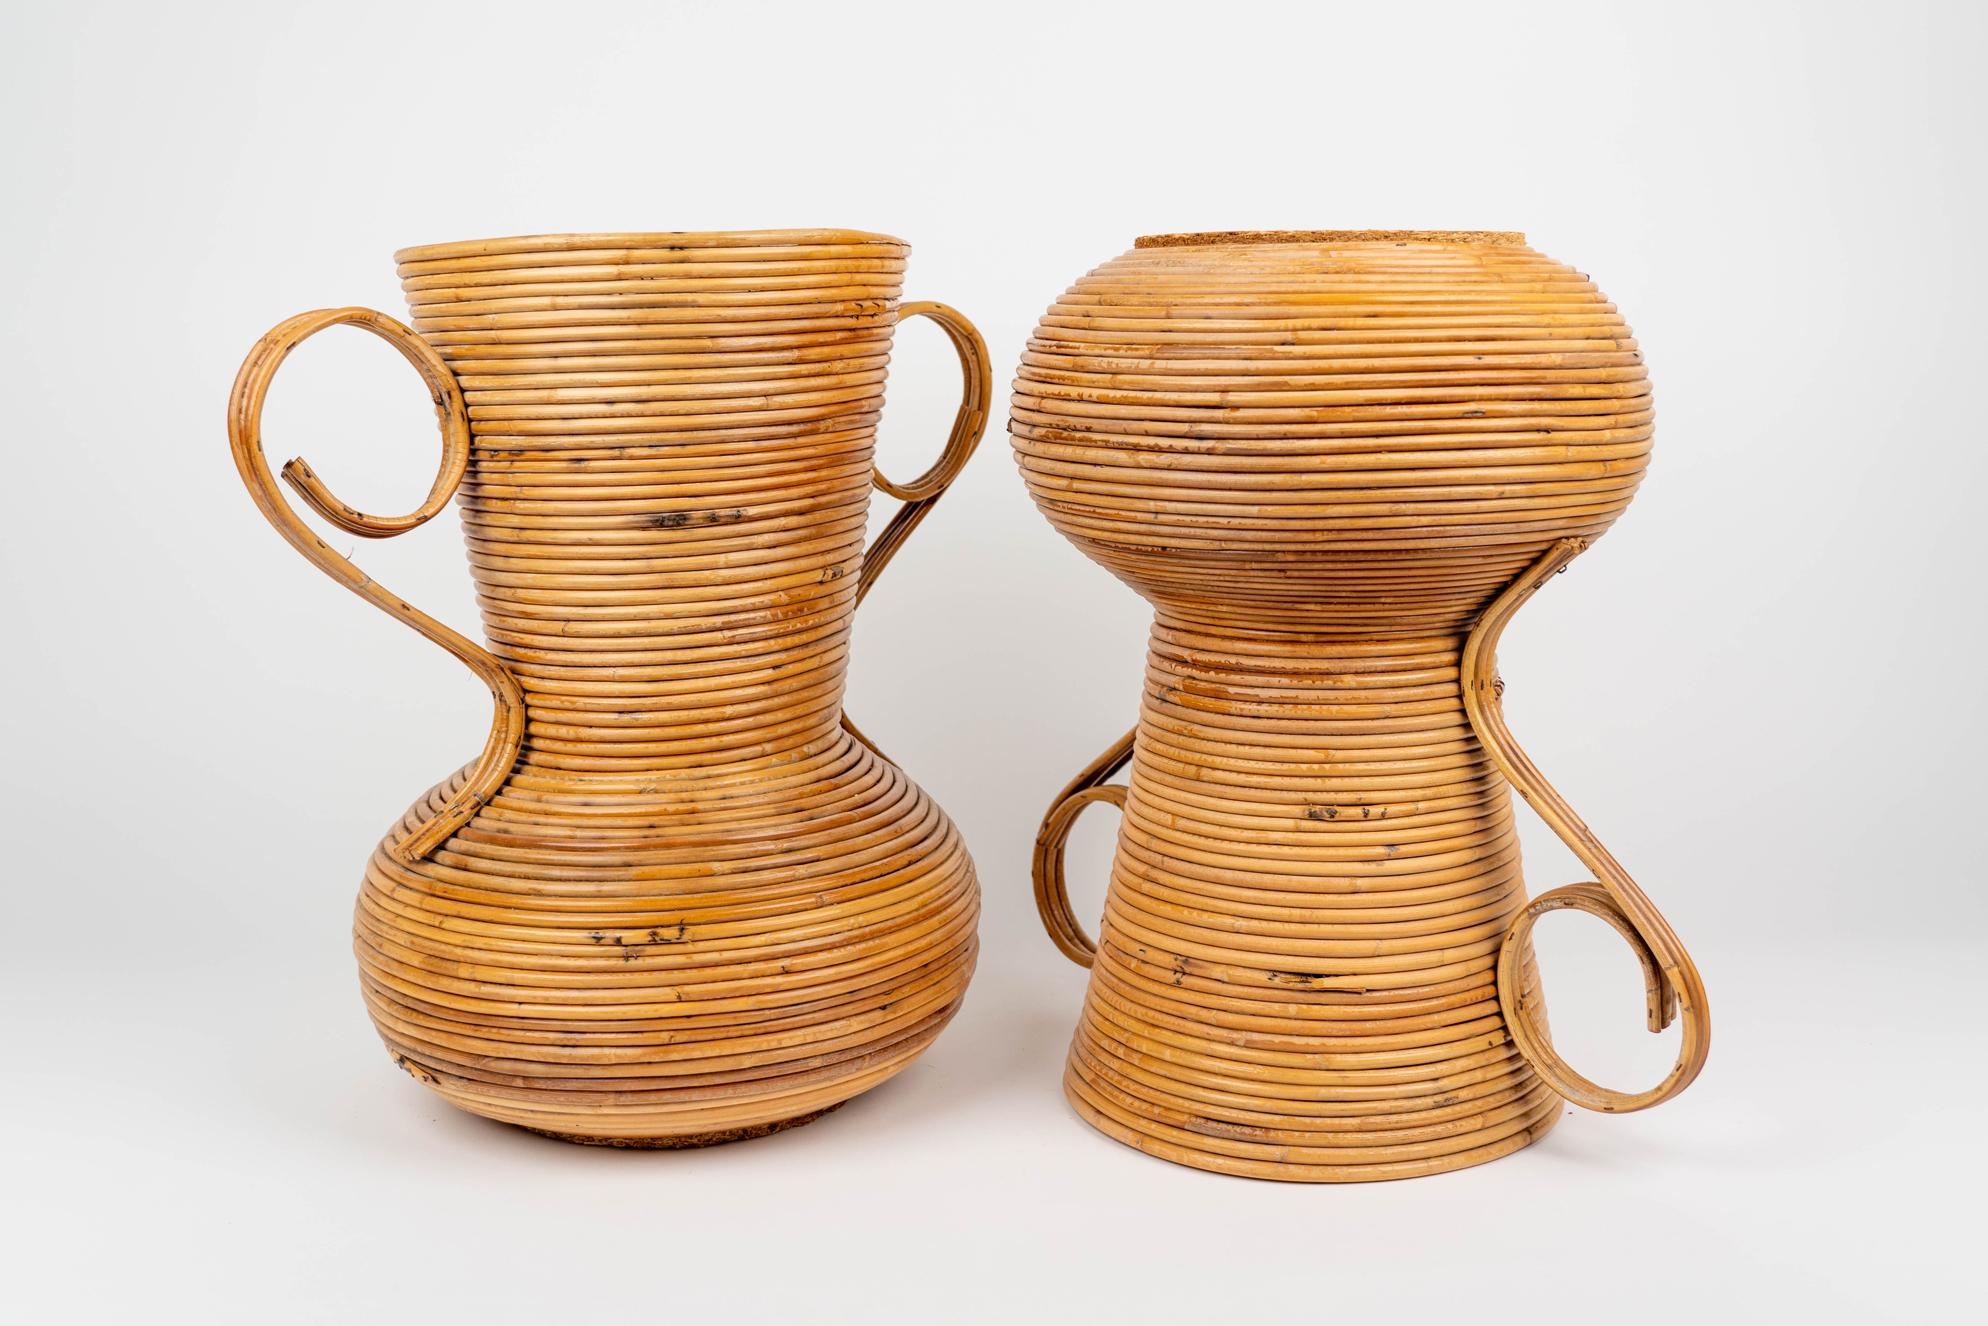 Bamboo Pair of Rattan Amphoras Vases by Vivai del Sud, Italy 1960s For Sale